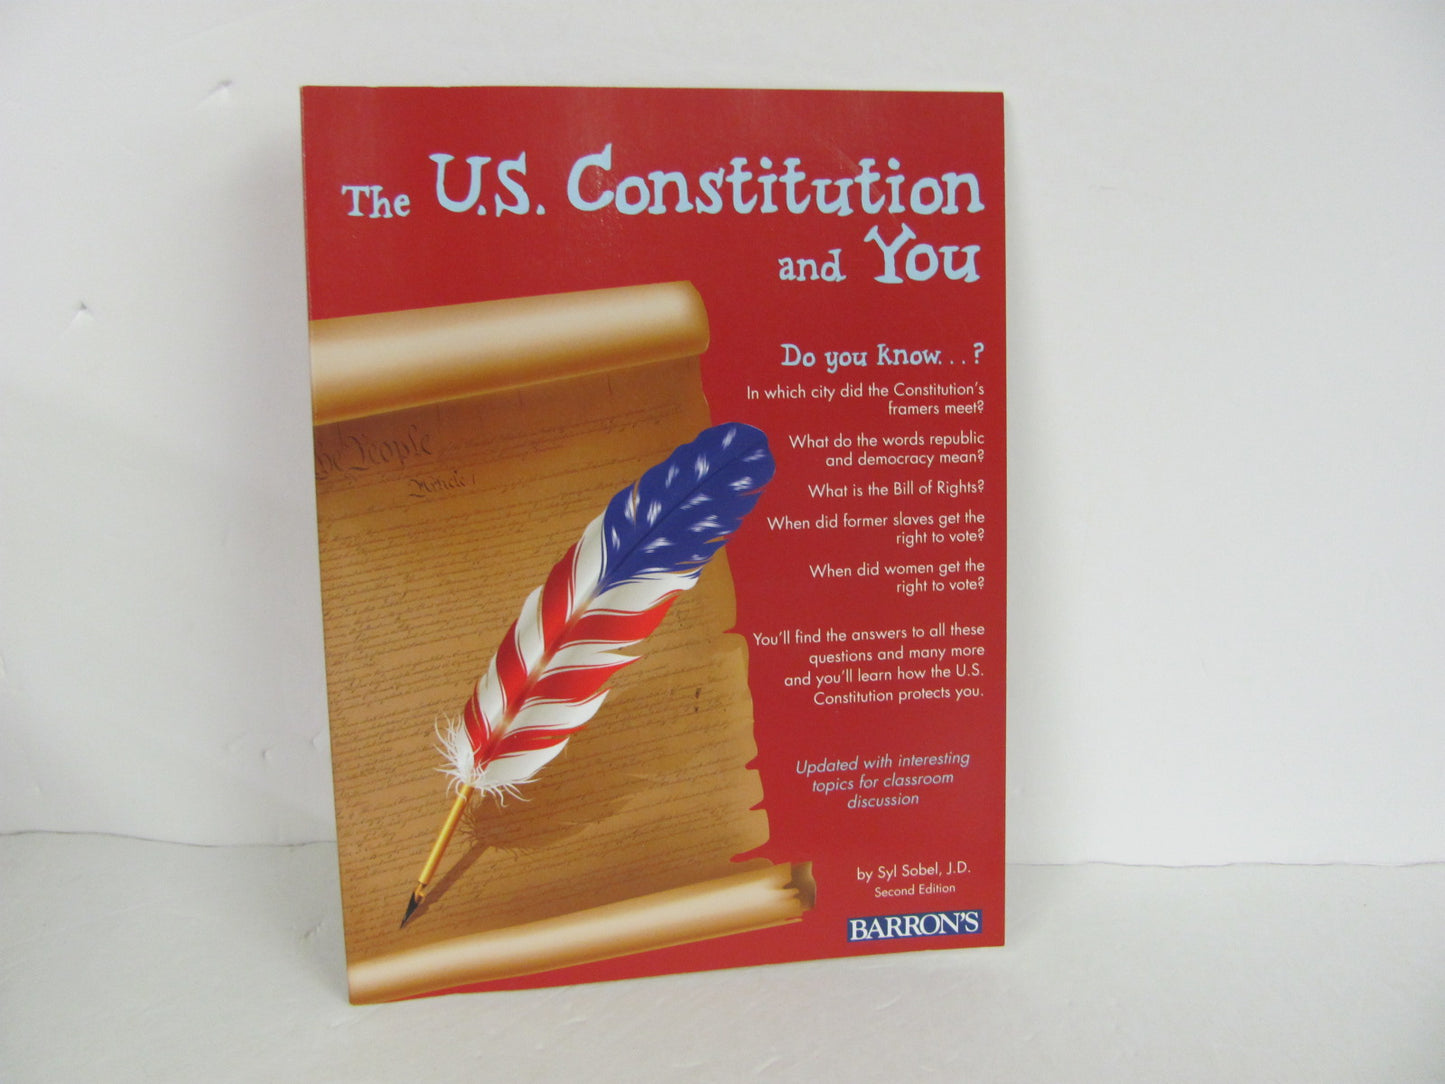 U.S. Constitution and You Barrons Used Sobel American Government Books